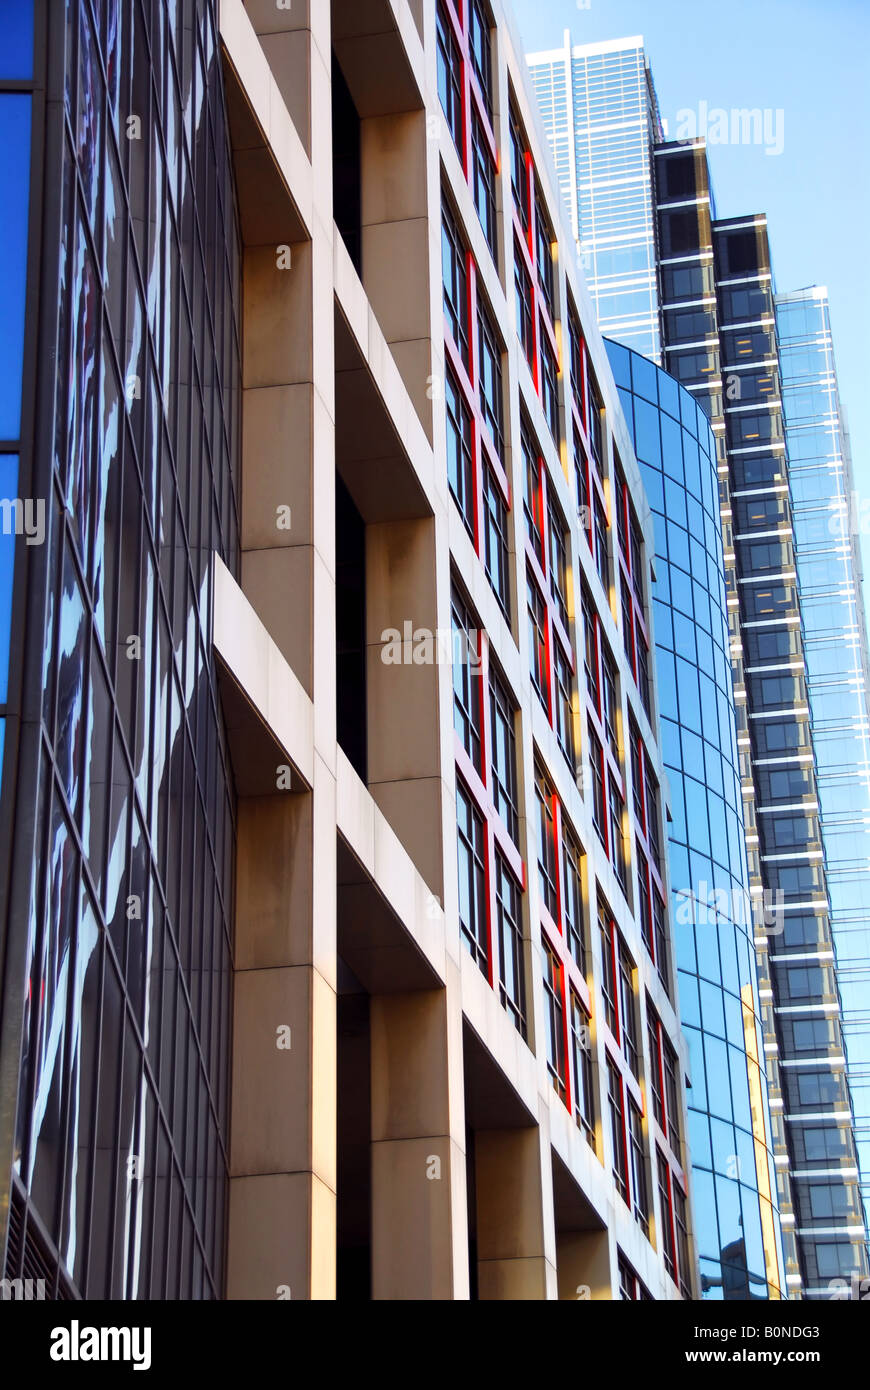 Row of modern office buildings urban architectural abstract Stock Photo